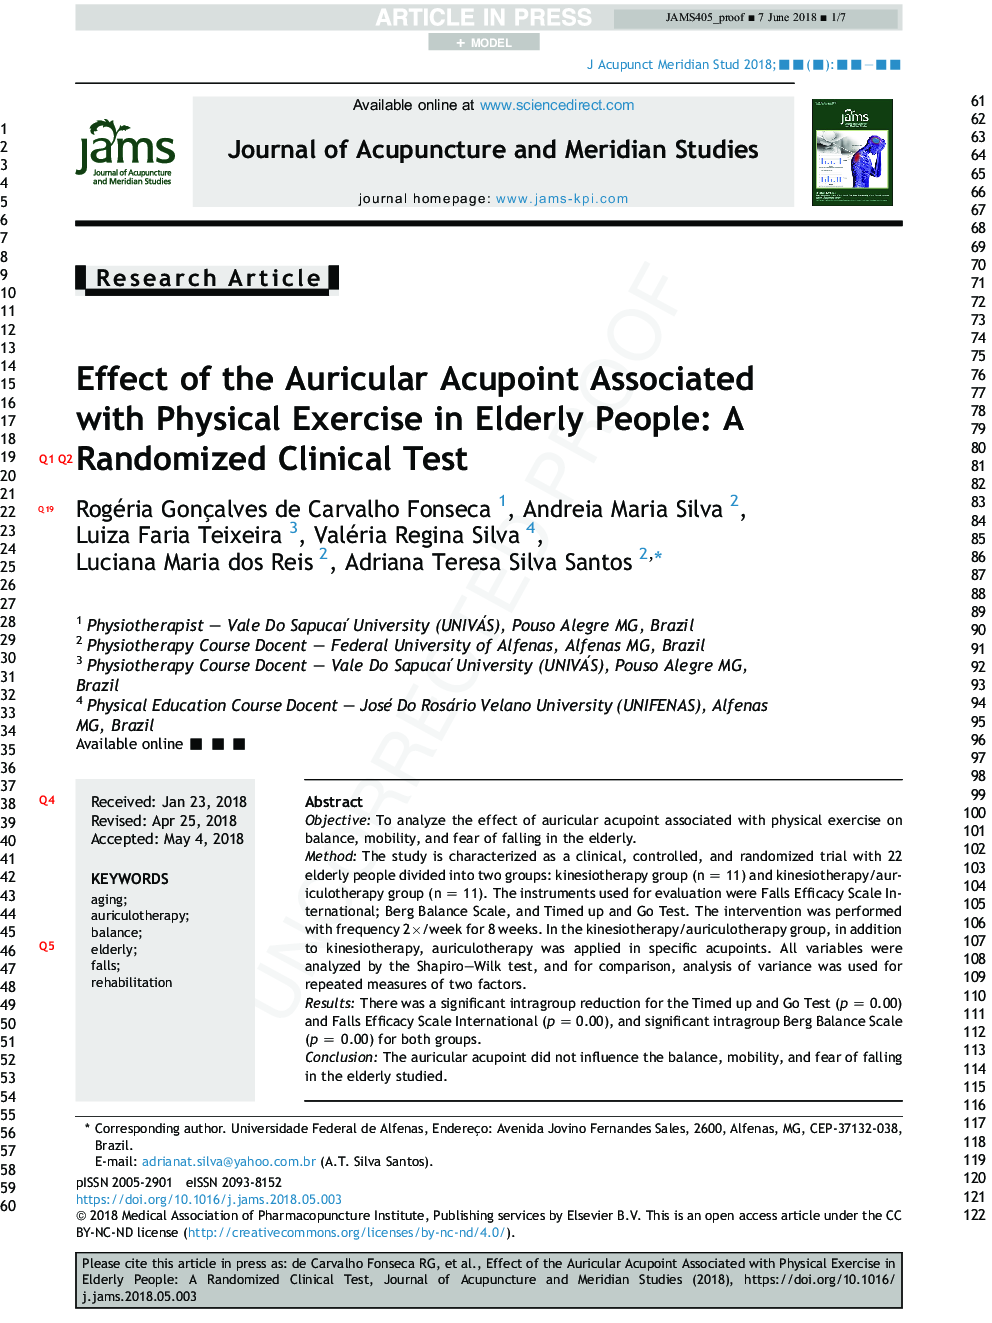 Effect of the Auricular Acupoint Associated with Physical Exercise in Elderly People: A Randomized Clinical Test